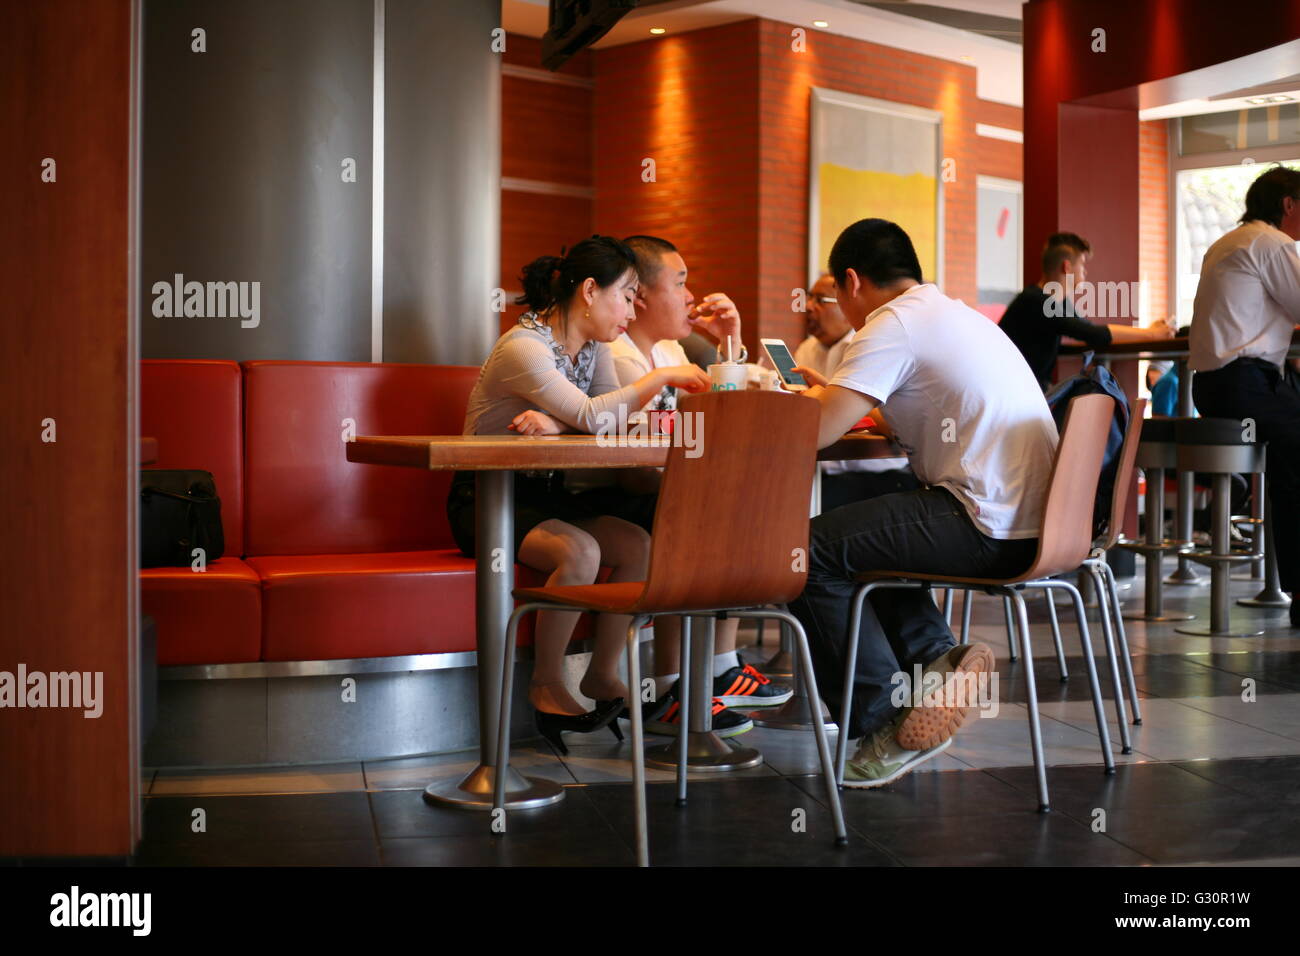 fast food restaurant, Cologne, Germany Stock Photo